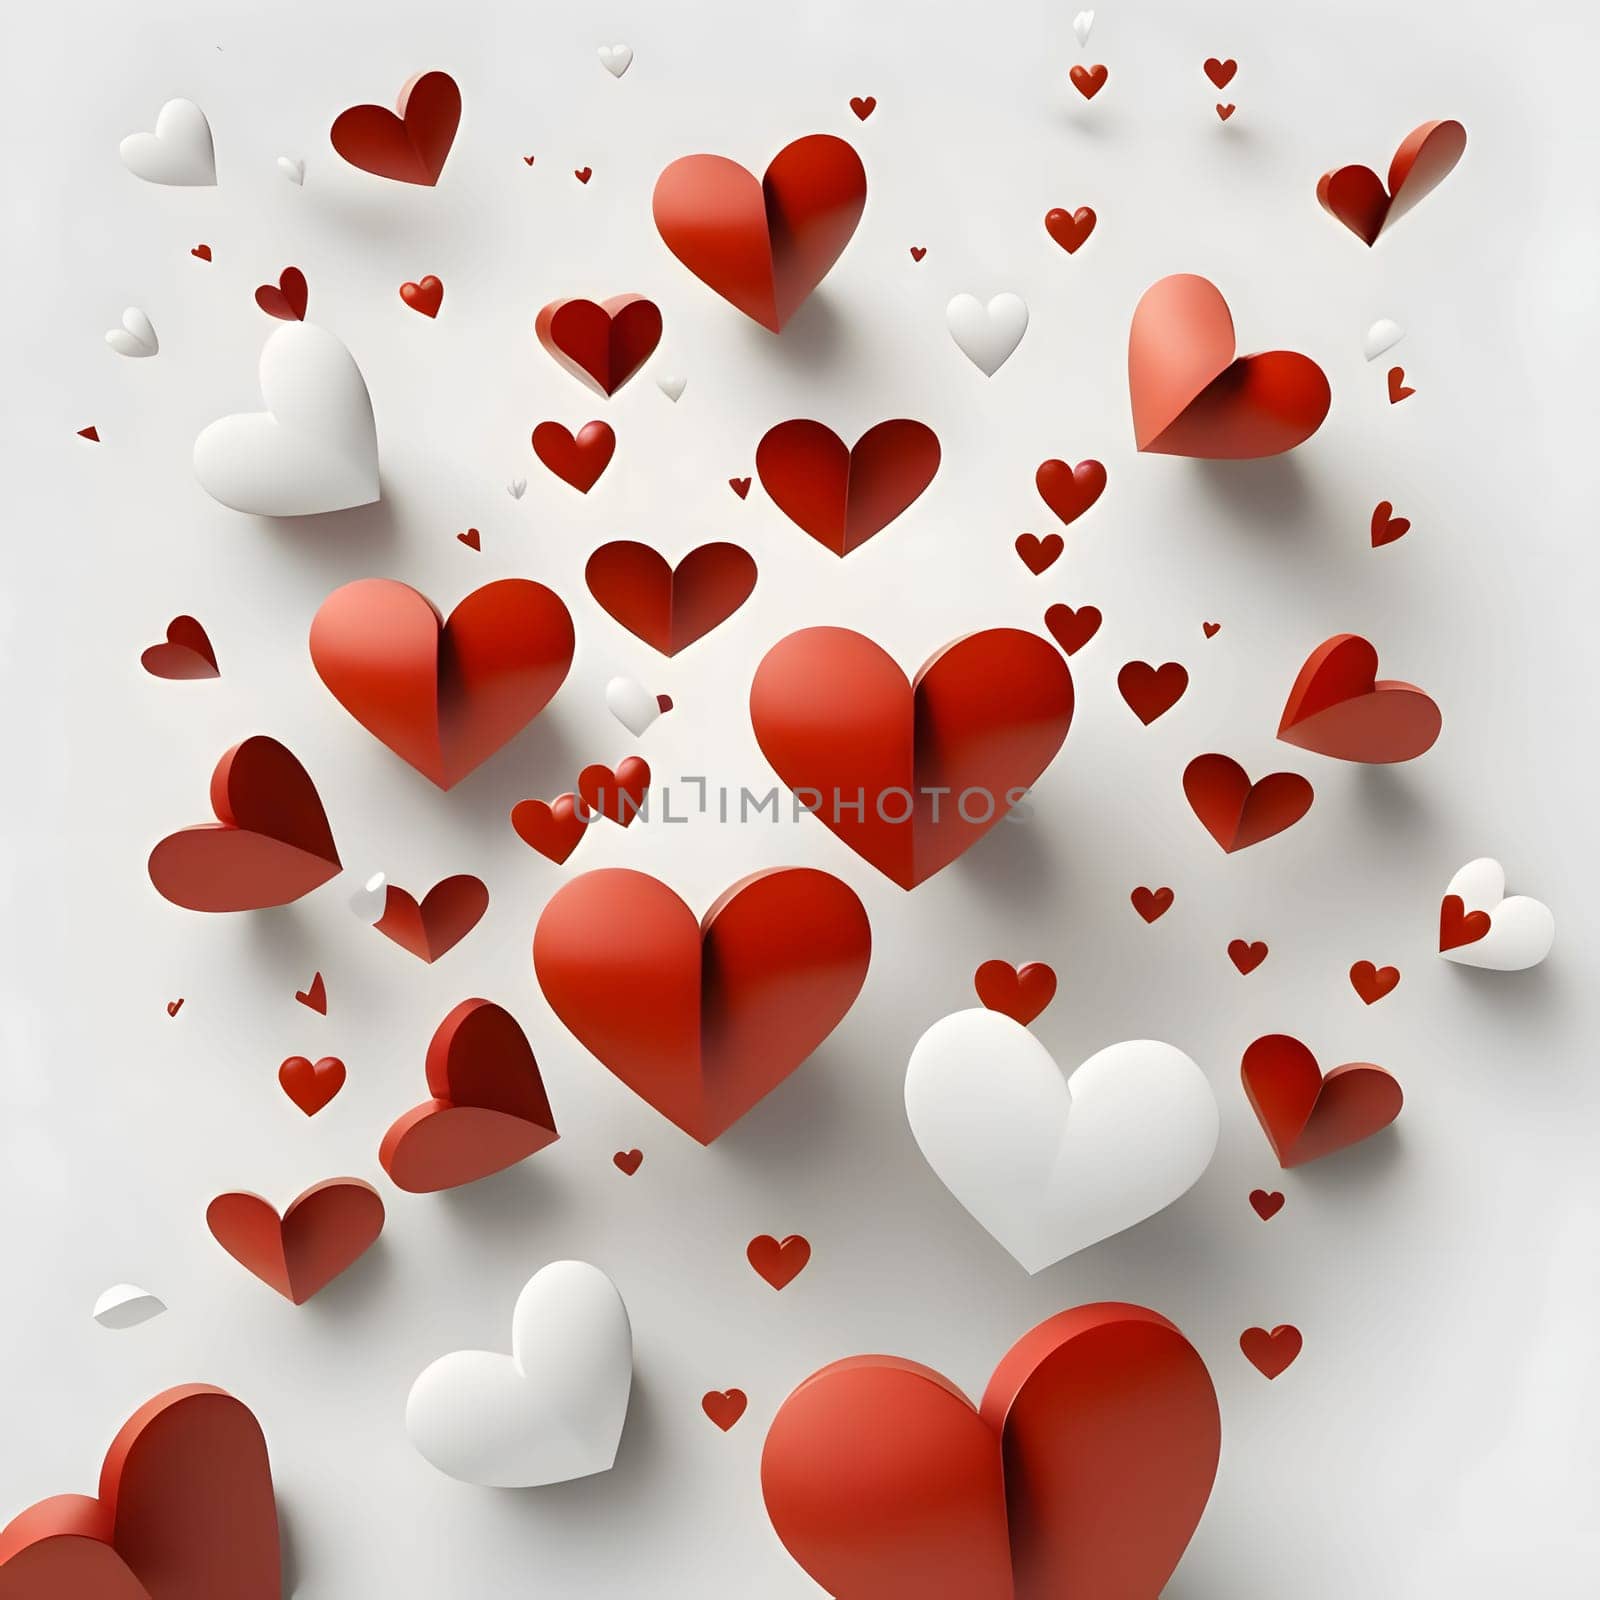 Red and white hearts on a gray background. Heart as a symbol of affection and love. The time of falling in love and love.